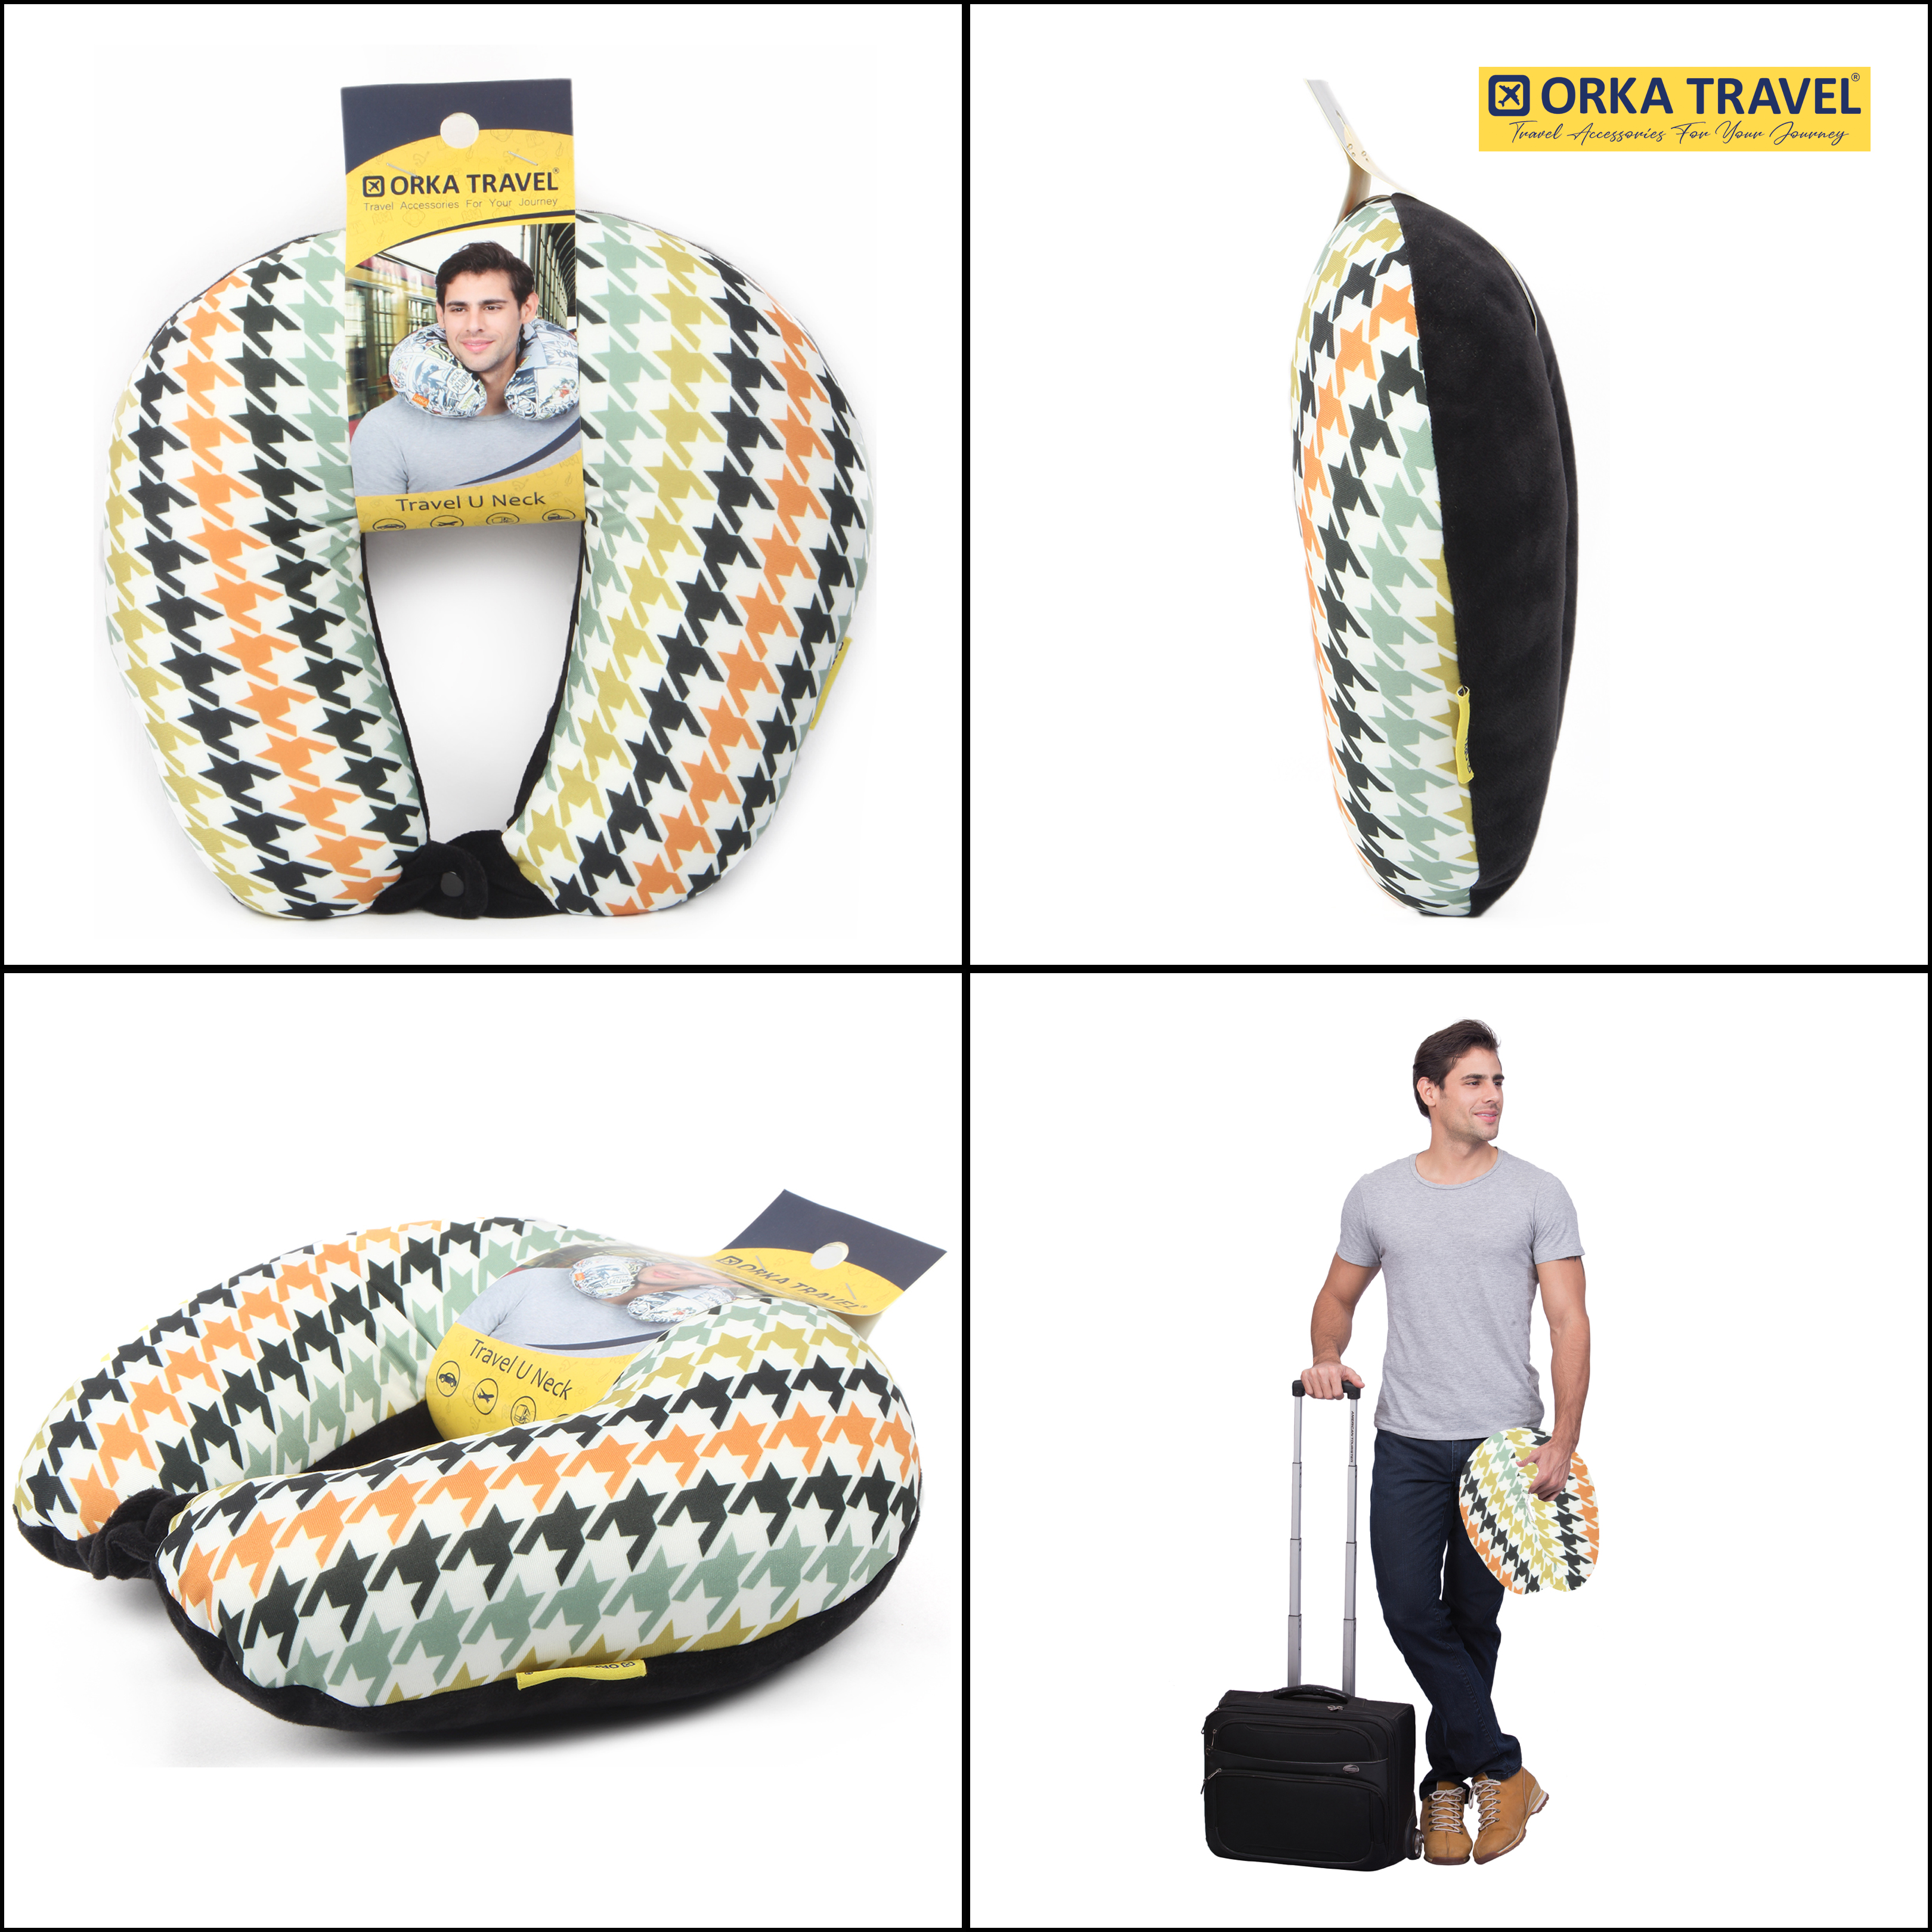 ORKA Travel Digital Printed Spandex With Micro Beads Travel U Neck Pillow Houndstooth  